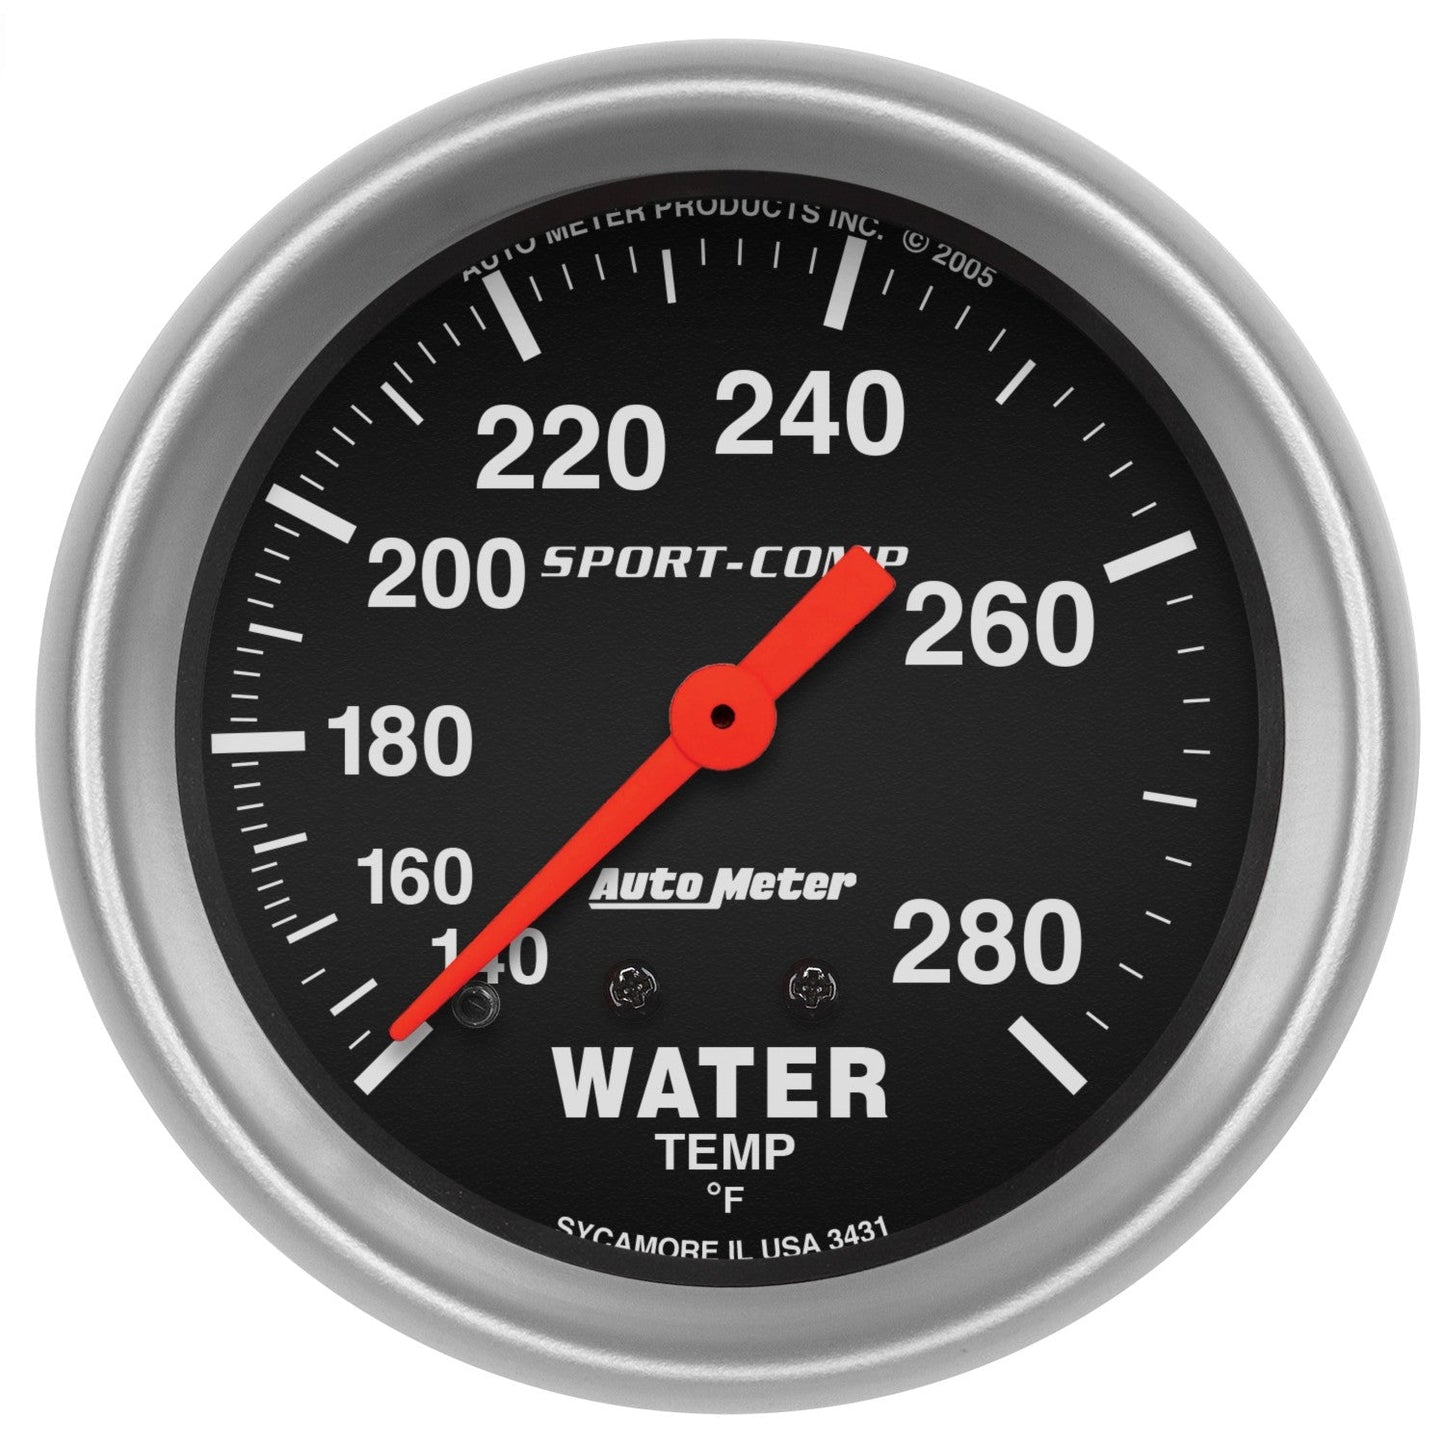 AutoMeter - 2-5/8" WATER TEMPERATURE, 140-280 °F, 6 FT., MECHANICAL, SPORT-COMP (3431)